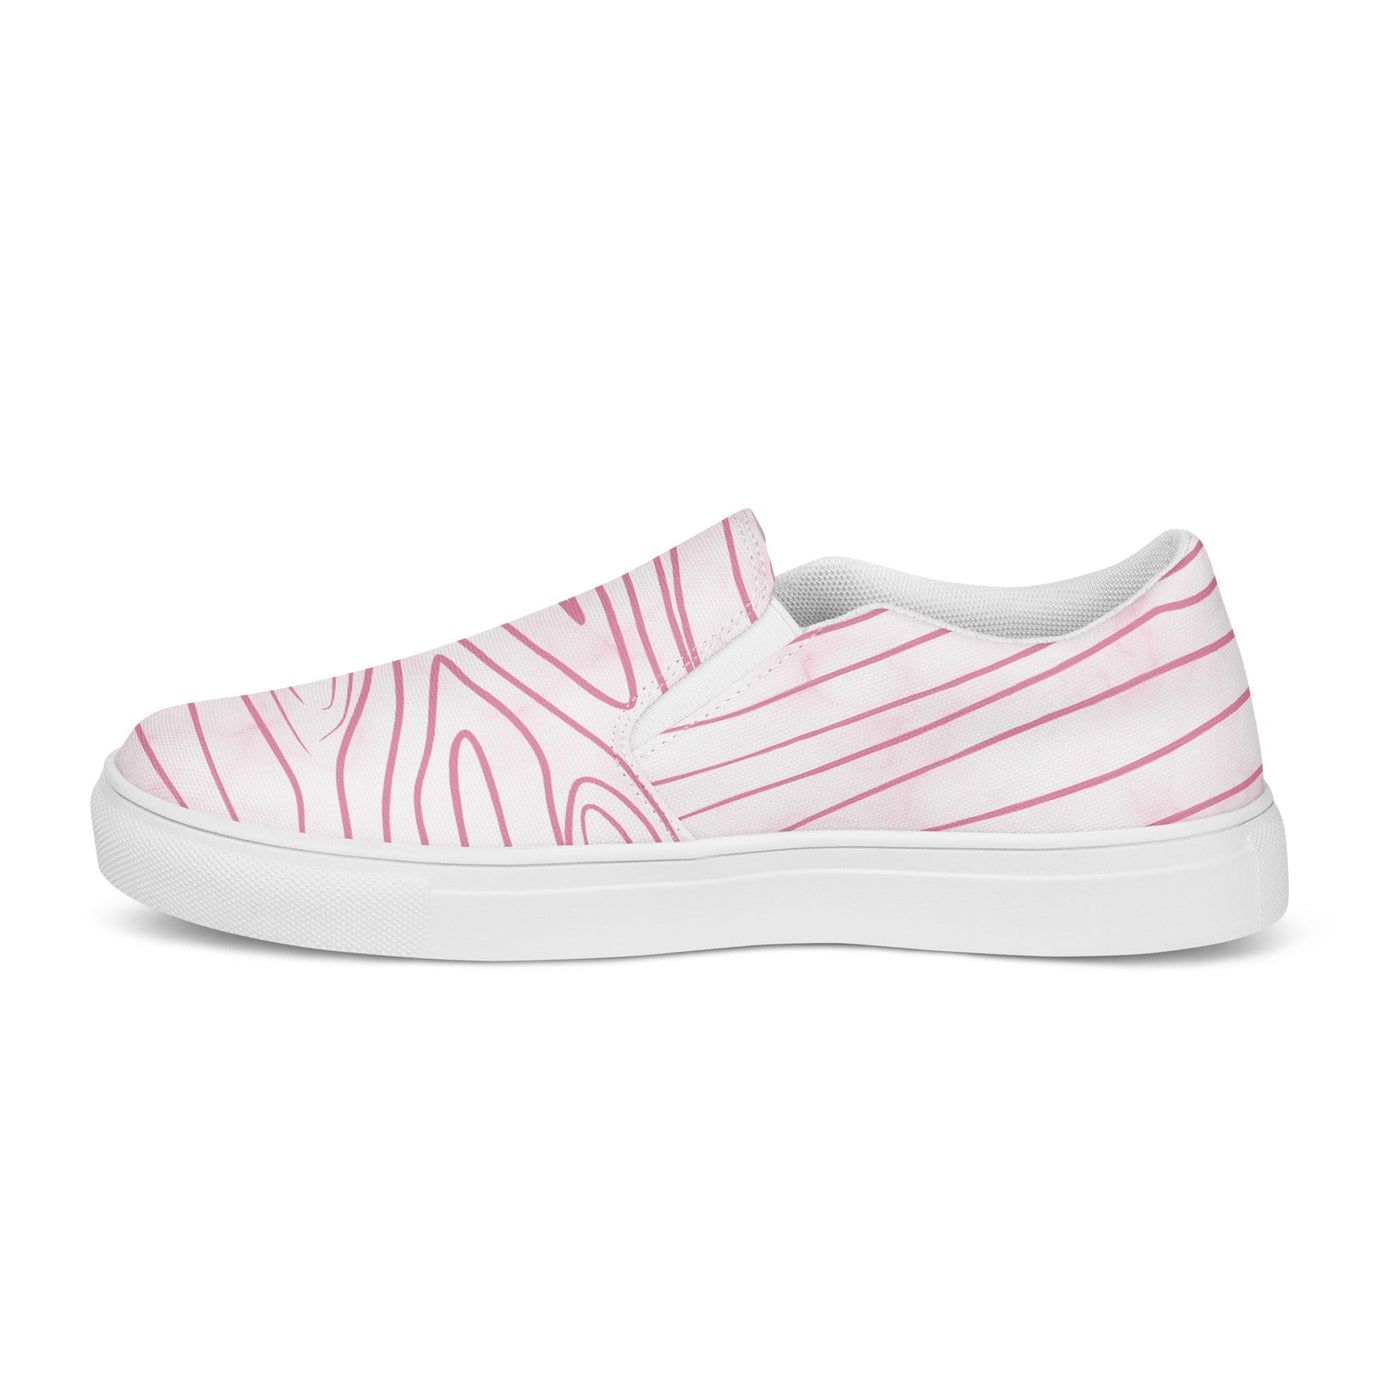 Women’s Slip-on Canvas Shoes Pink Line Art Sketch Print - Womens | Sneakers